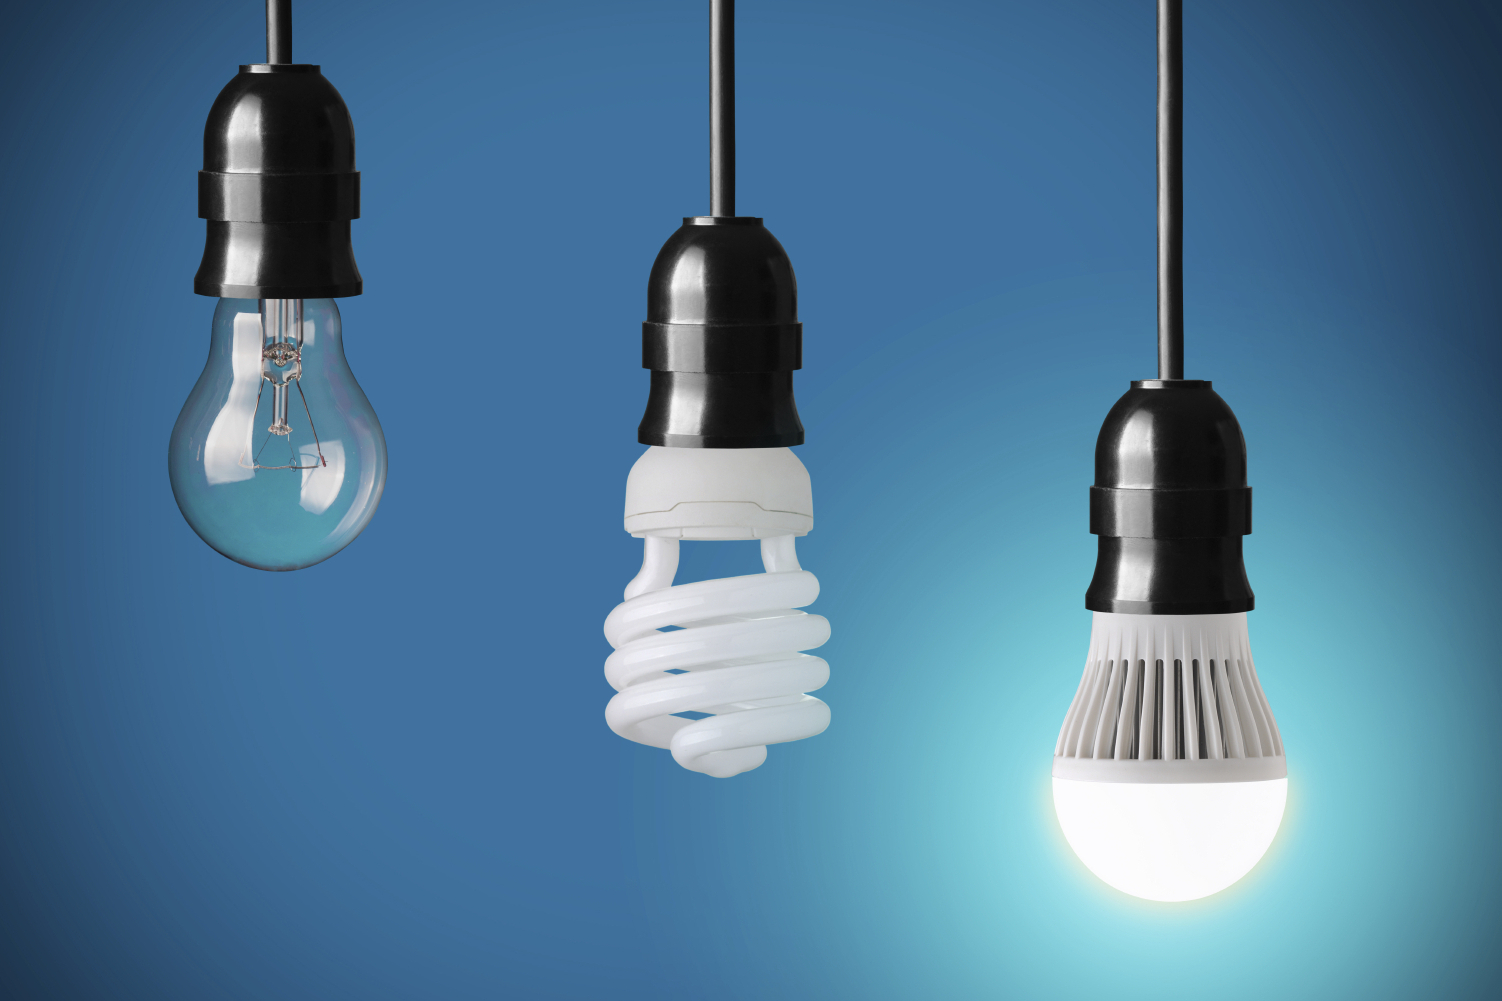 Watts The Deal Demystifying Leds Cfls, Can A 3 Way Light Bulb Be Used In Any Lamp